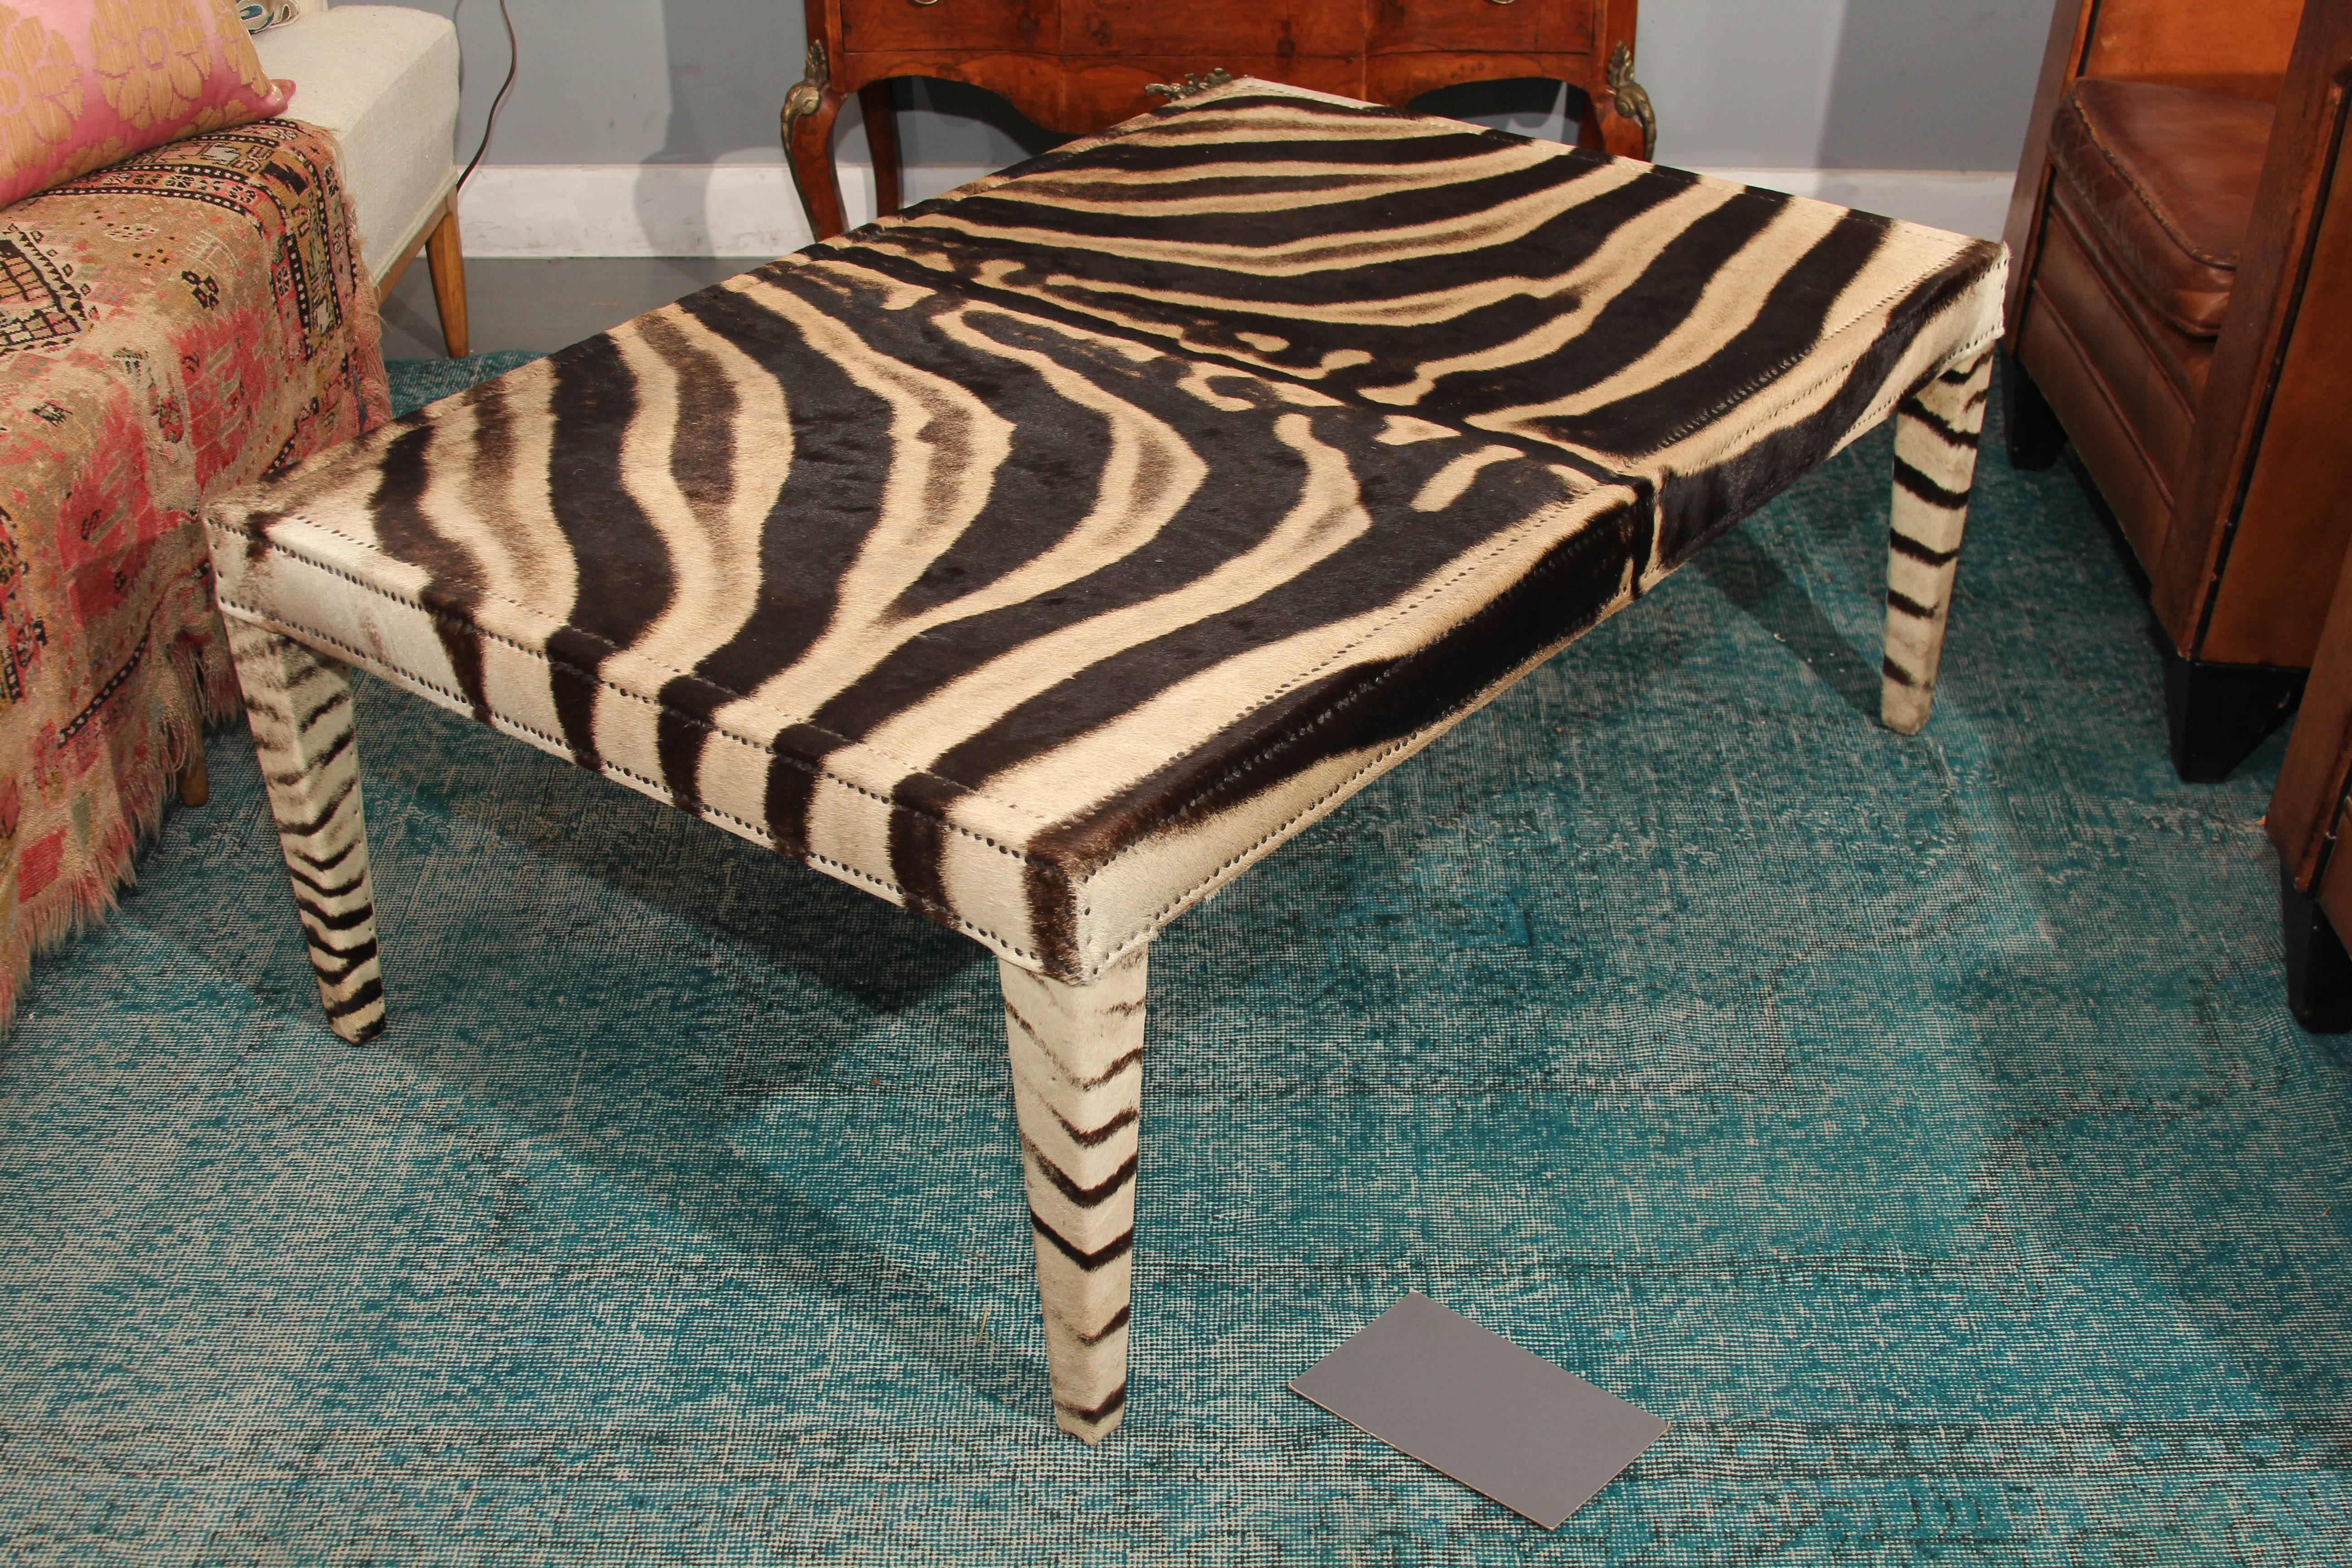 Very handsome coffee table in vintage zebra hide, trimmed in small nailheads.